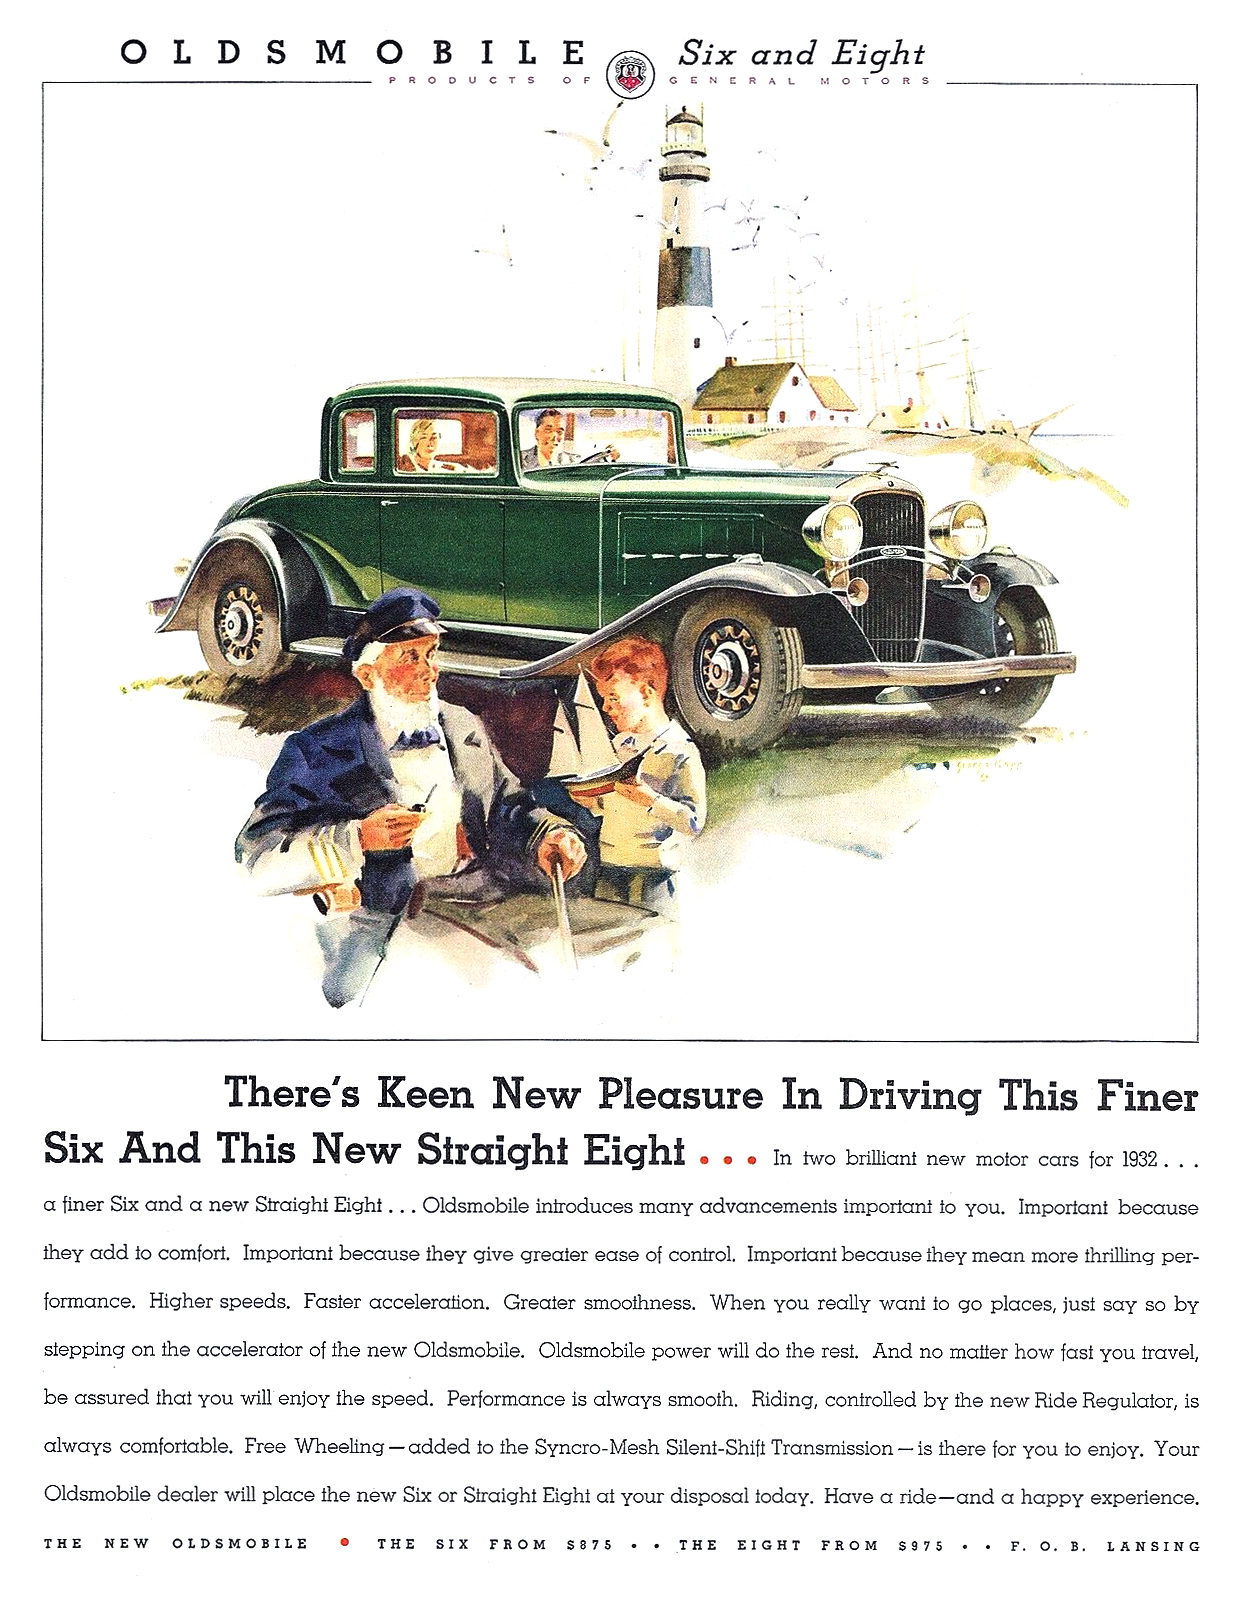 Oldsmobile Business Coupe Ad (April, 1932): Illustrated by George Rapp